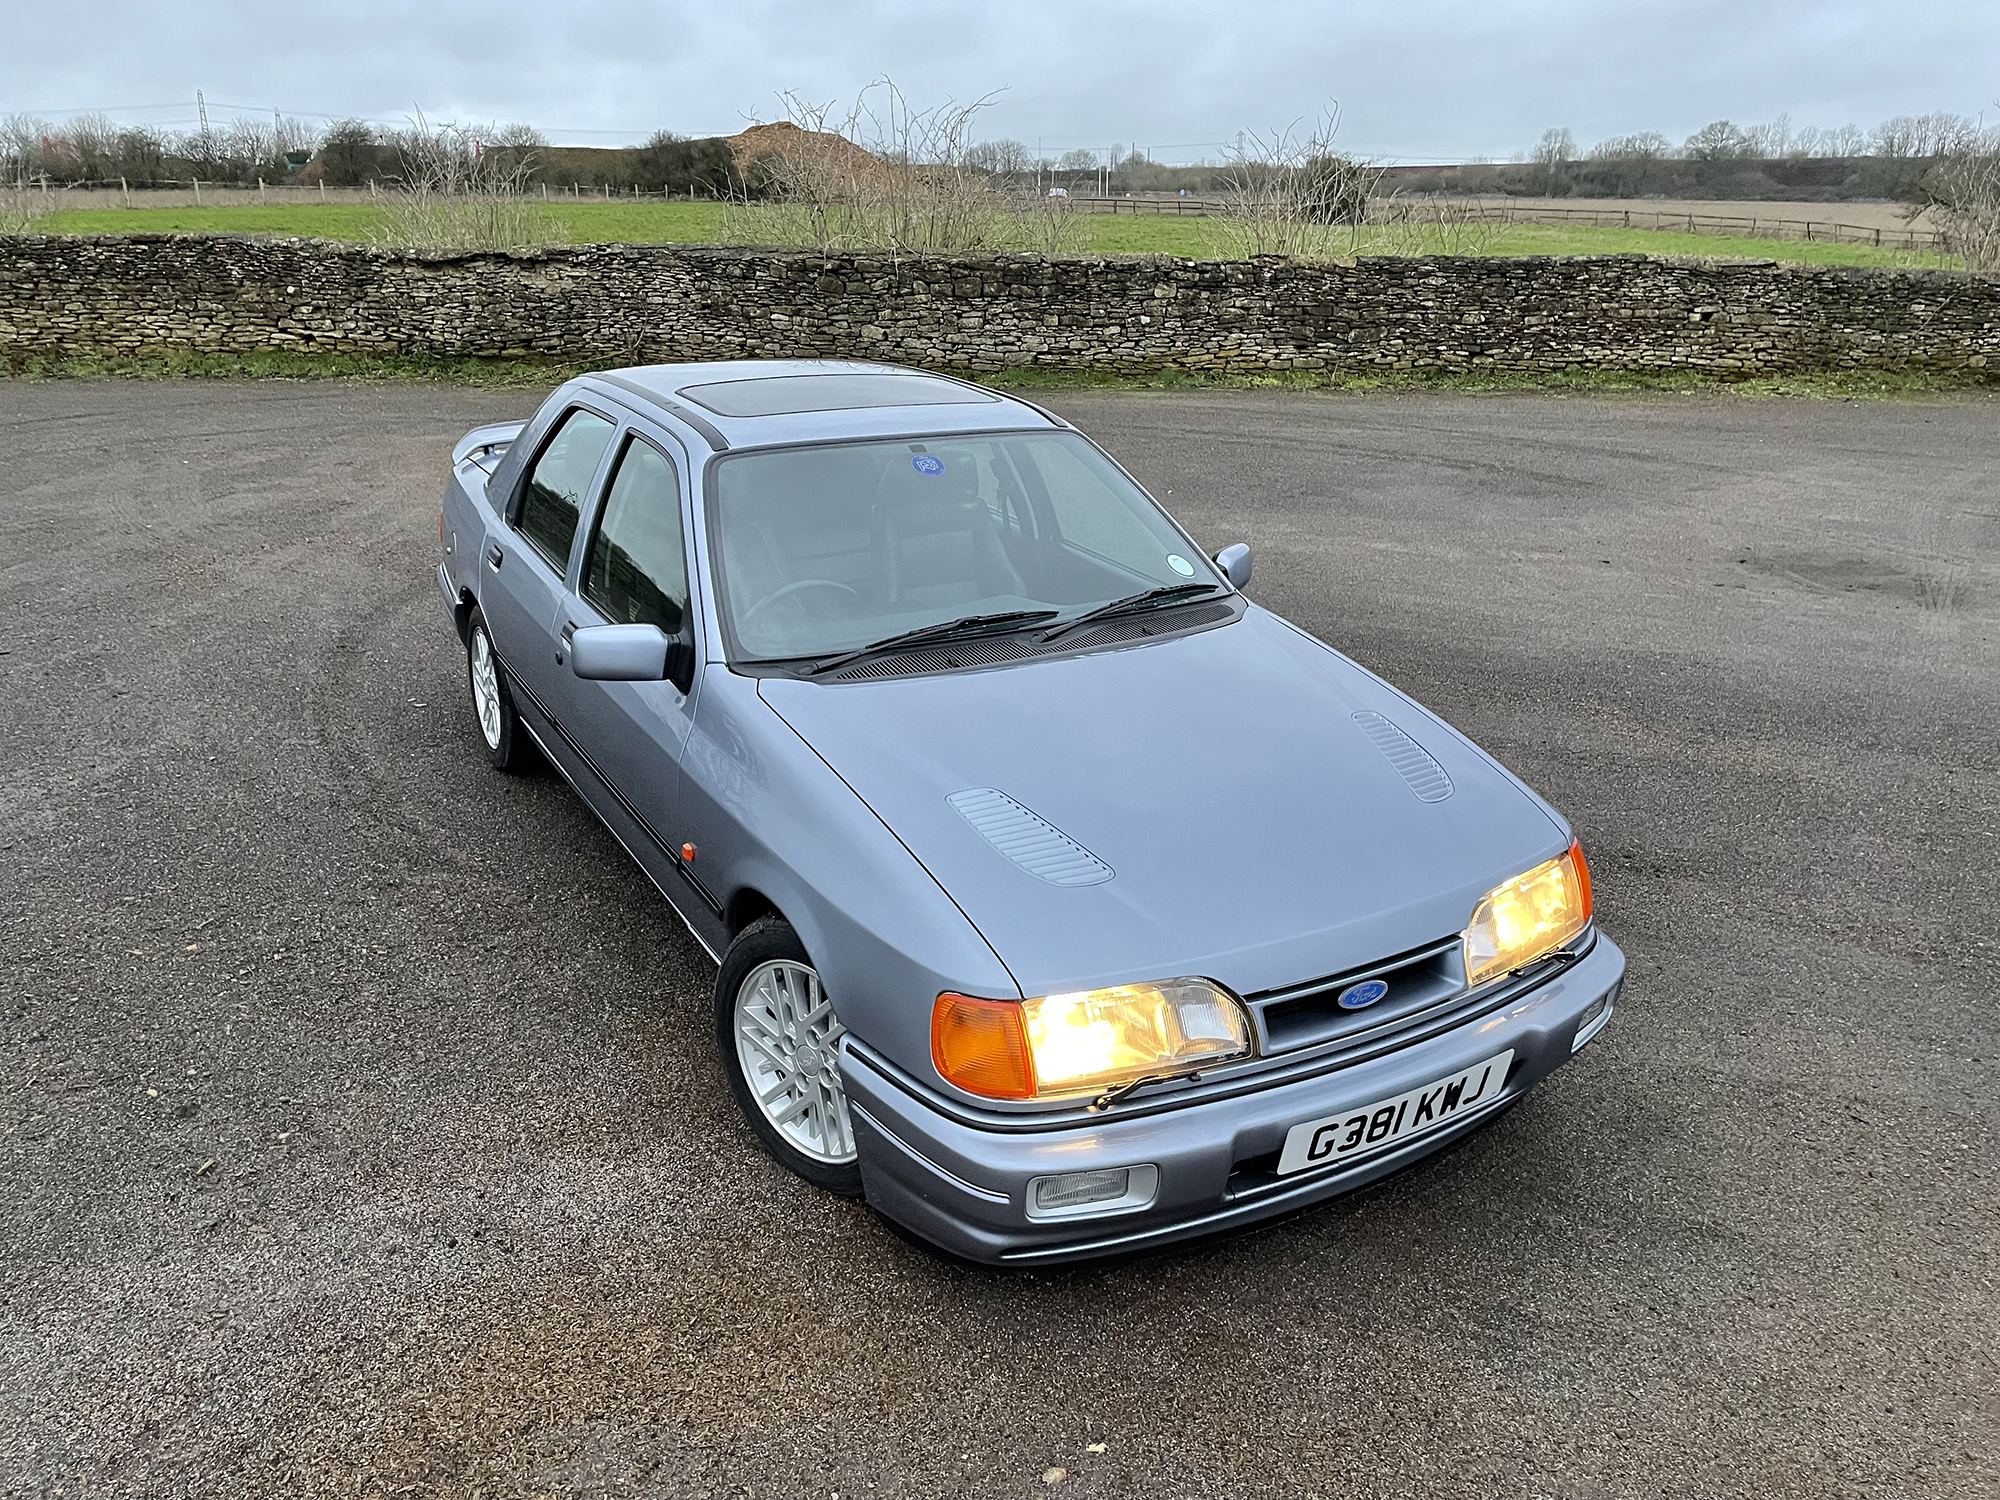 1989 Ford Sierra RS Cosworth Reg. no. G381 KWJ Chassis no. WF0FXXGBBFKR01249 - Image 14 of 26